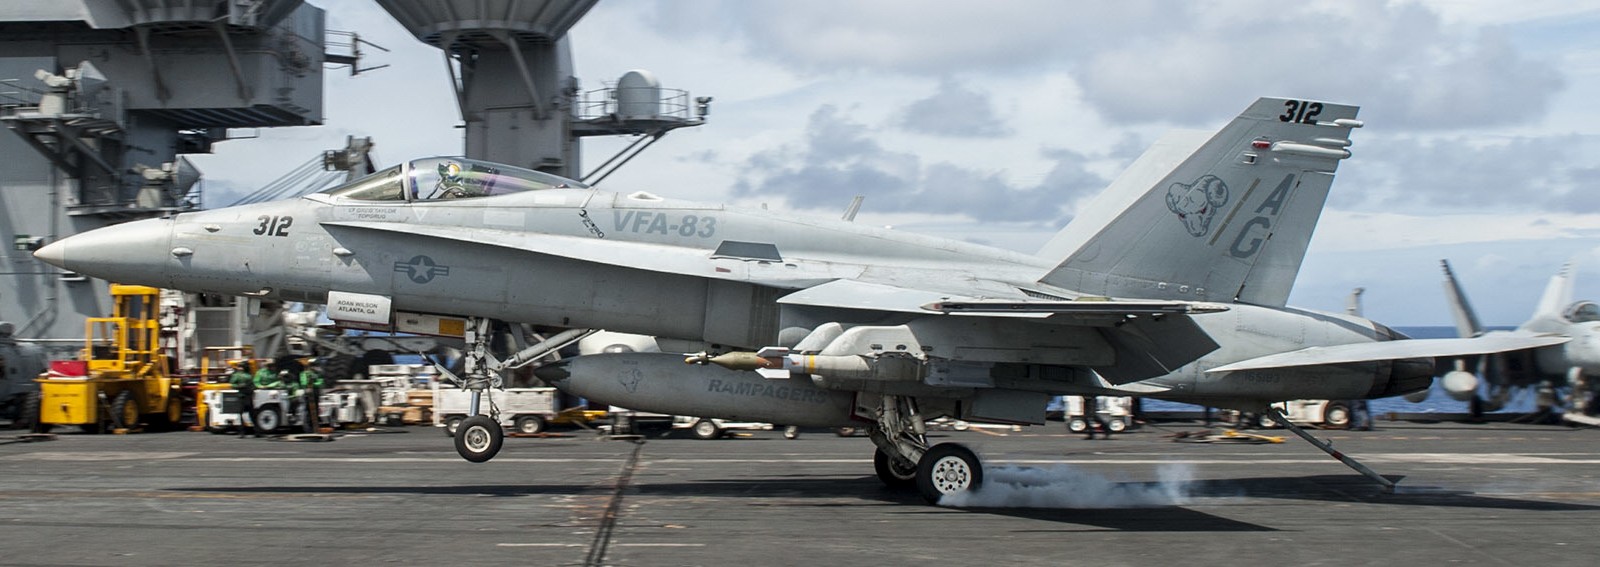 vfa-83 rampagers strike fighter squadron f/a-18c hornet cvw-7 uss harry s. truman cvn-75 33